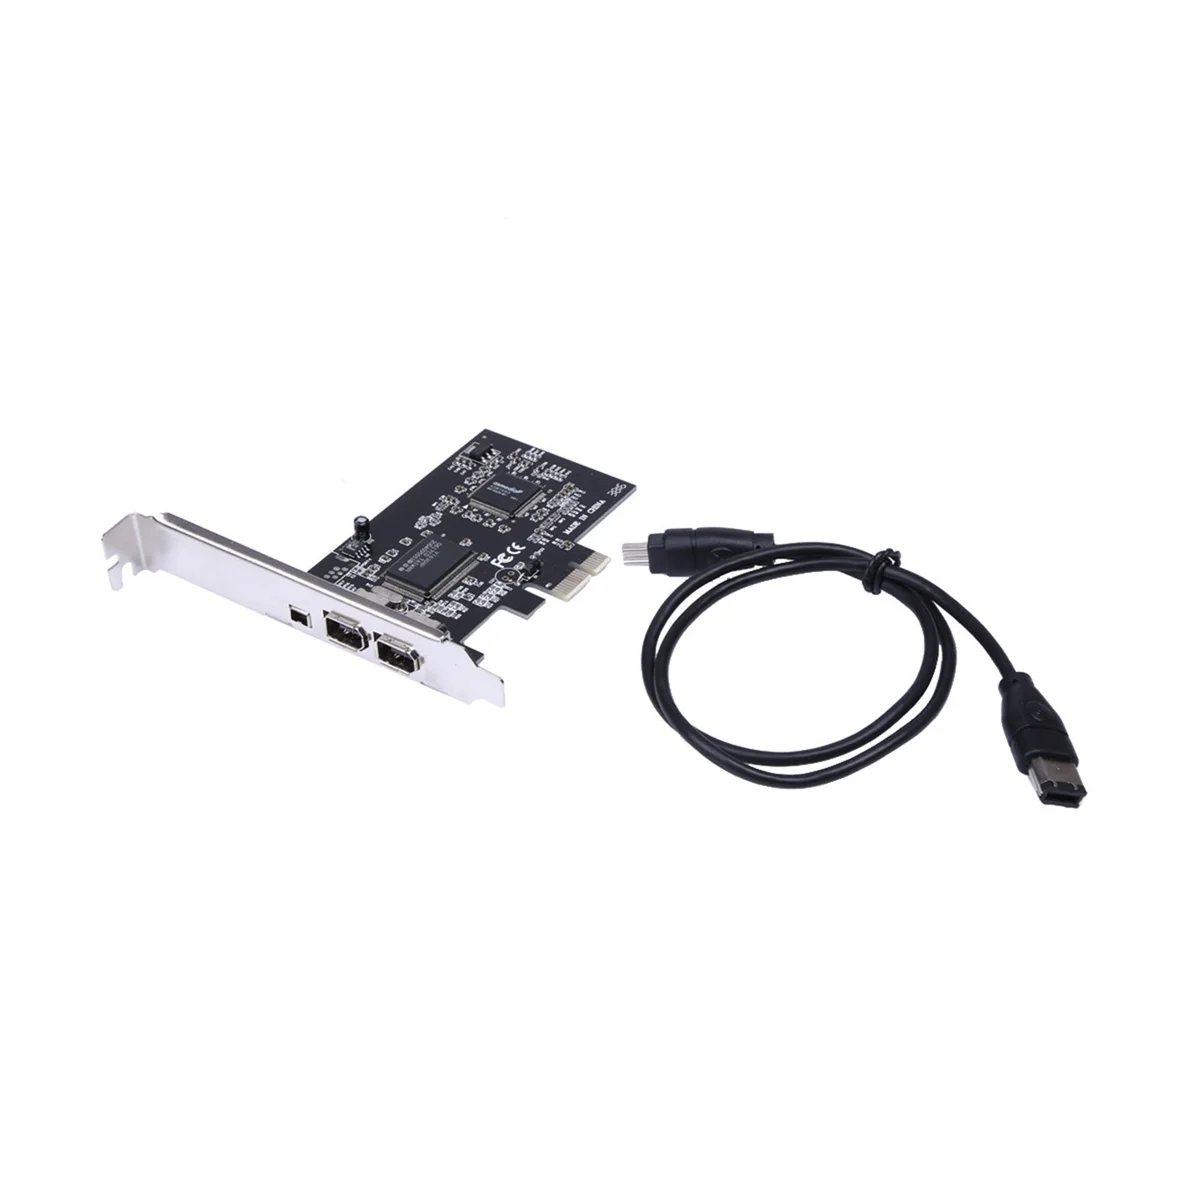 

PCI-E 1X to 16X 1394 DV Video PC Capture Expansion Card with 6Pin to 4Pin for Firewire Pcie Card Desktop